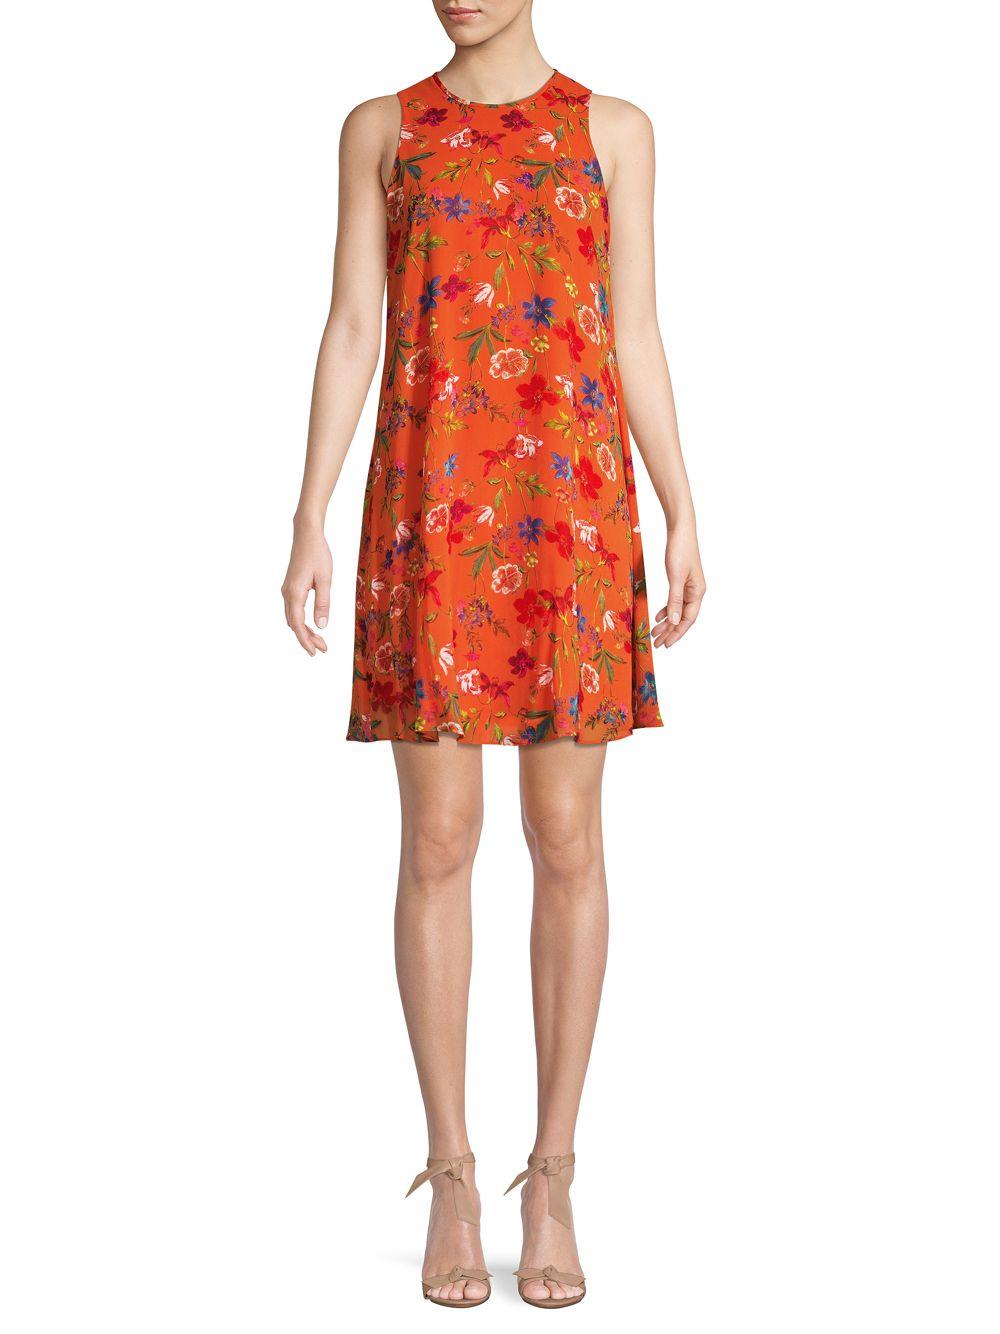 Calvin Klein Floral Chiffon Shift Dress in Red - Lyst